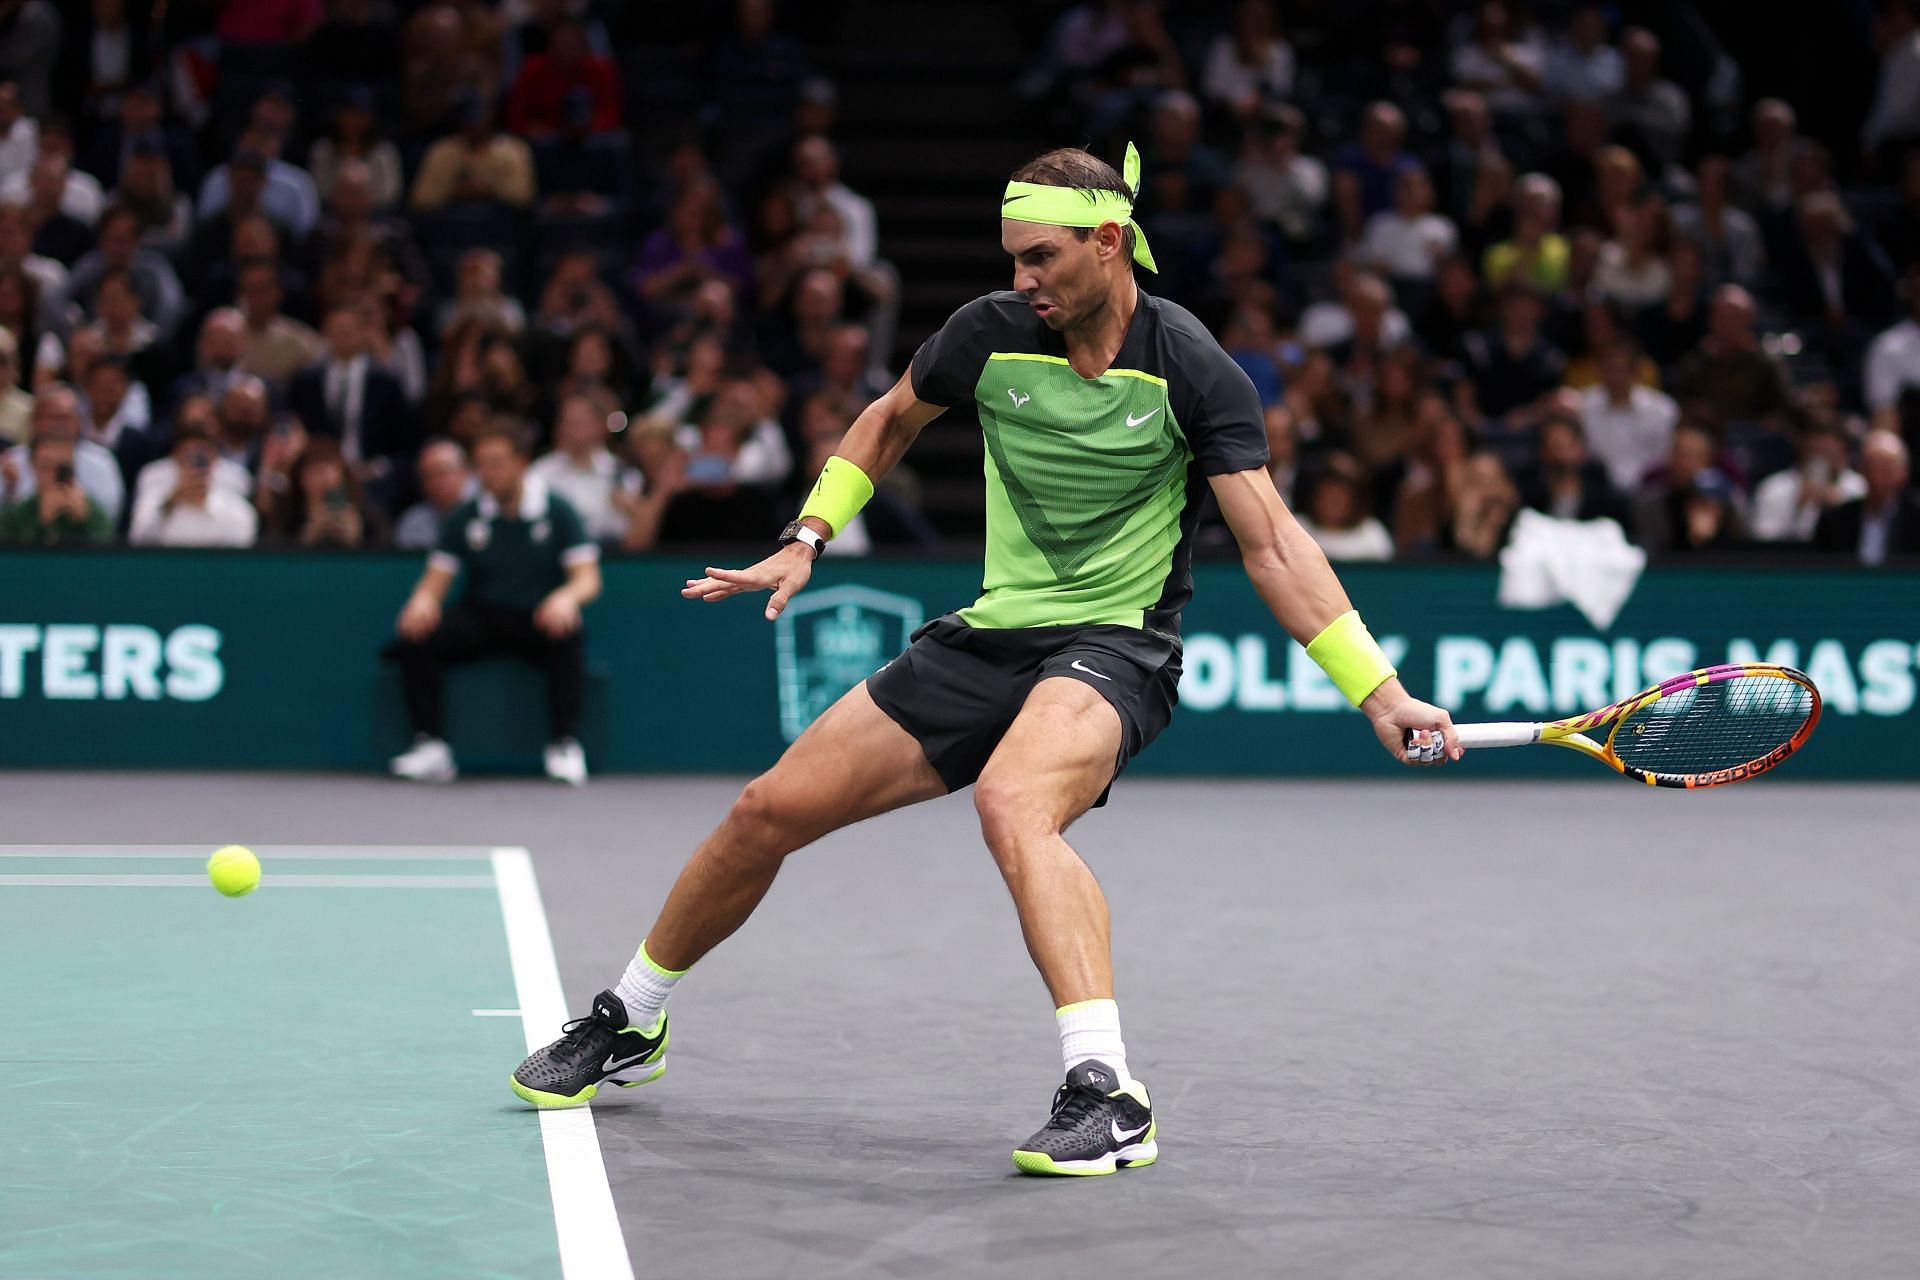 Watch Rafael Nadal hits a picture-perfect half-volley against Felix Auger- Aliassime at ATP Finals